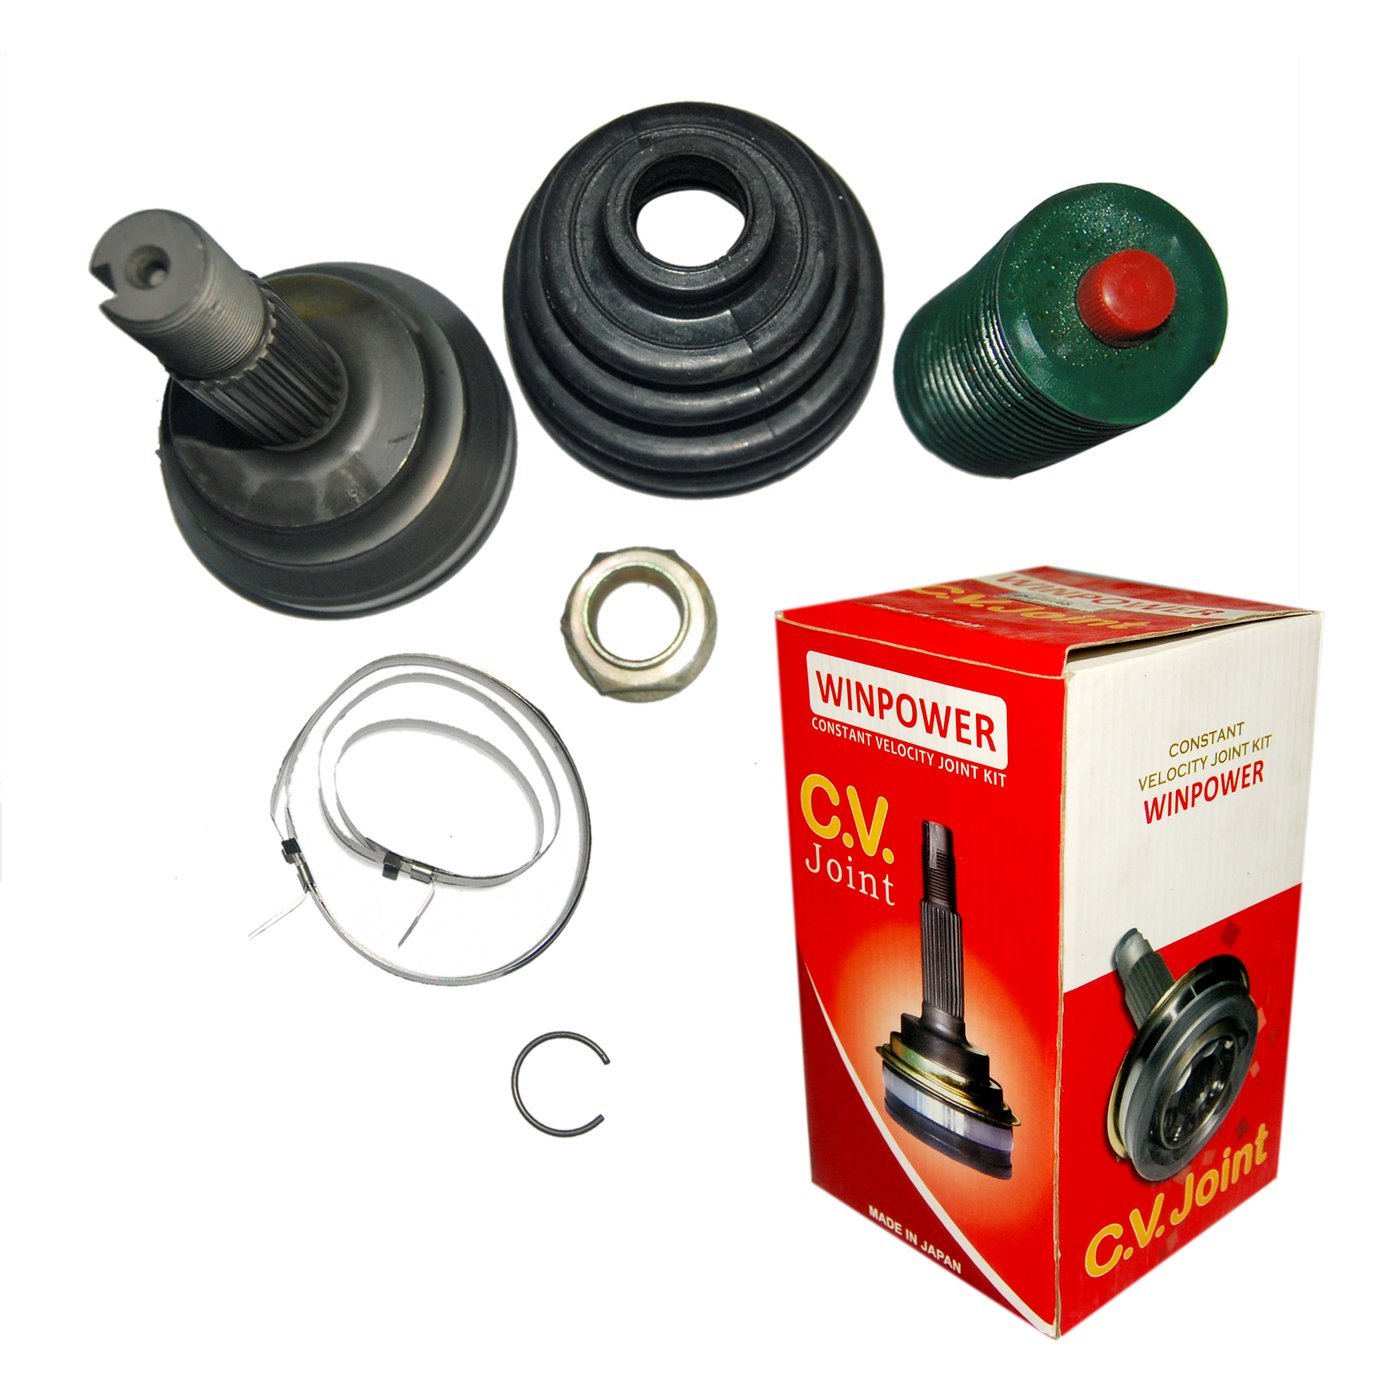 CV Joint, WINPOWER, 43430-35030, TO-38, 27(in)x69(D)x30(out) (000729) - Win Store